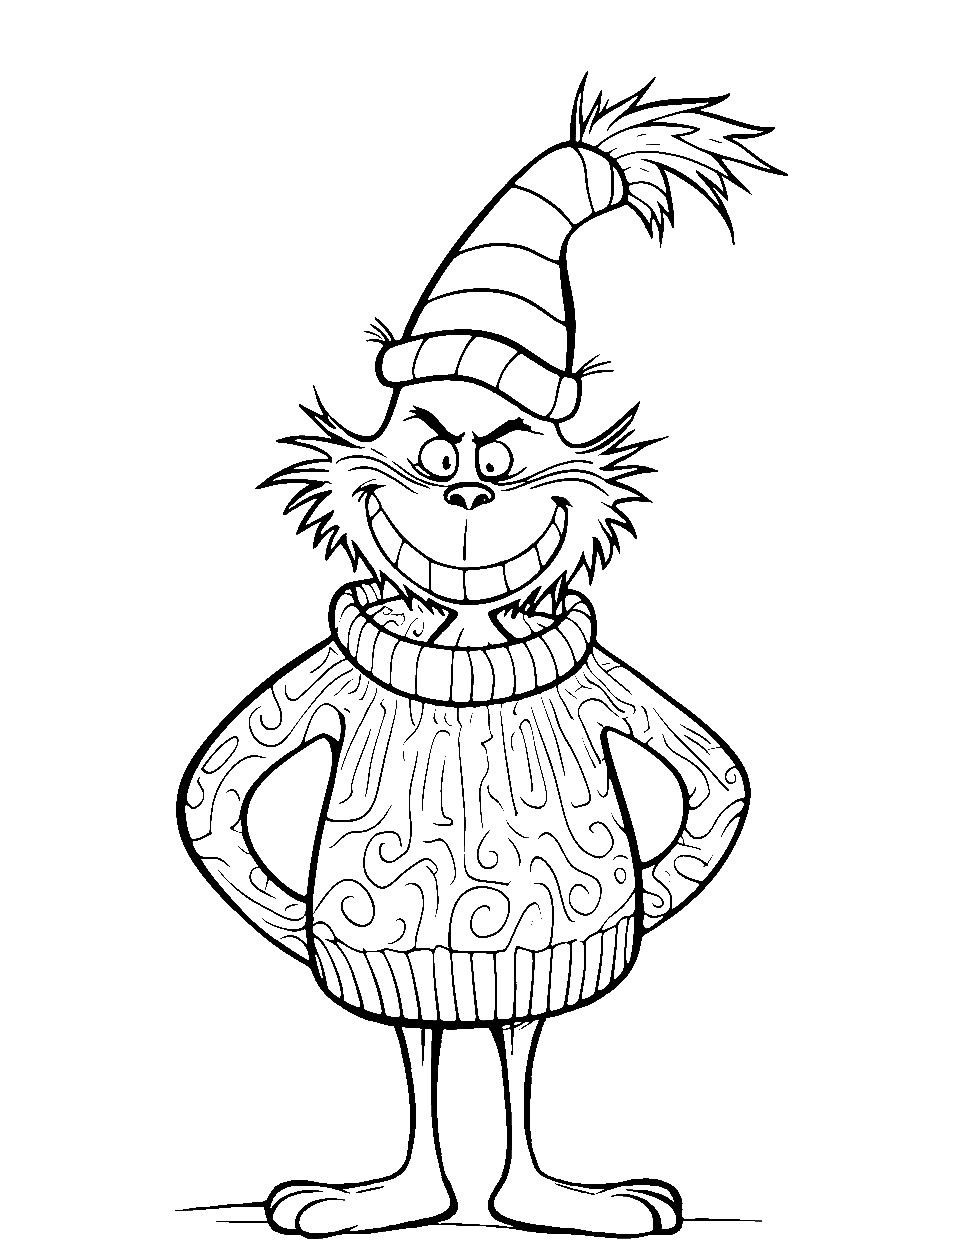 Festive Sweater Wearing Coloring Page - The Grinch is wearing a festive Christmas sweater.